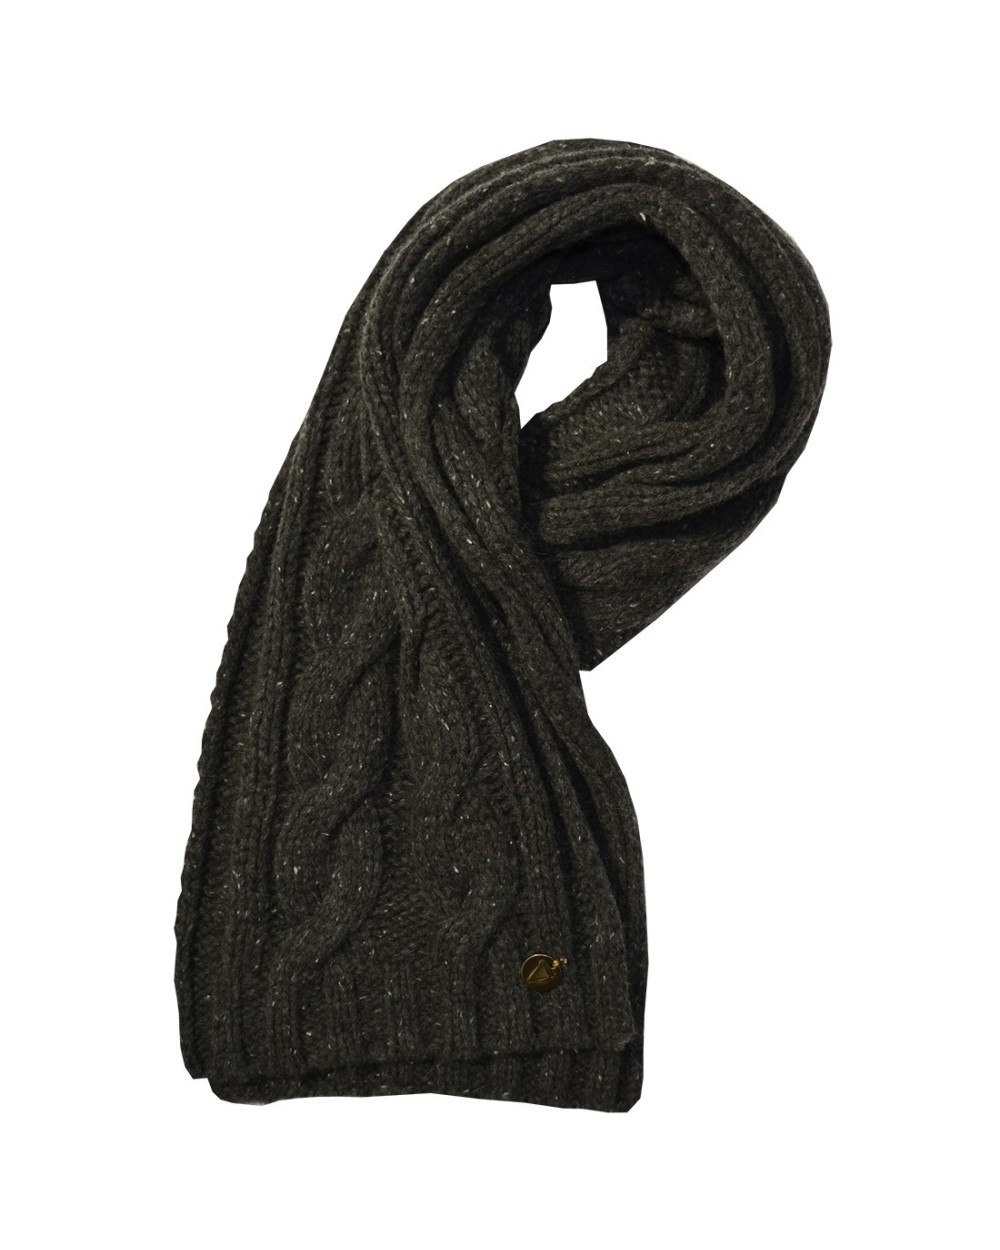 Charcoal Guinness Cable Rib knit Scarf